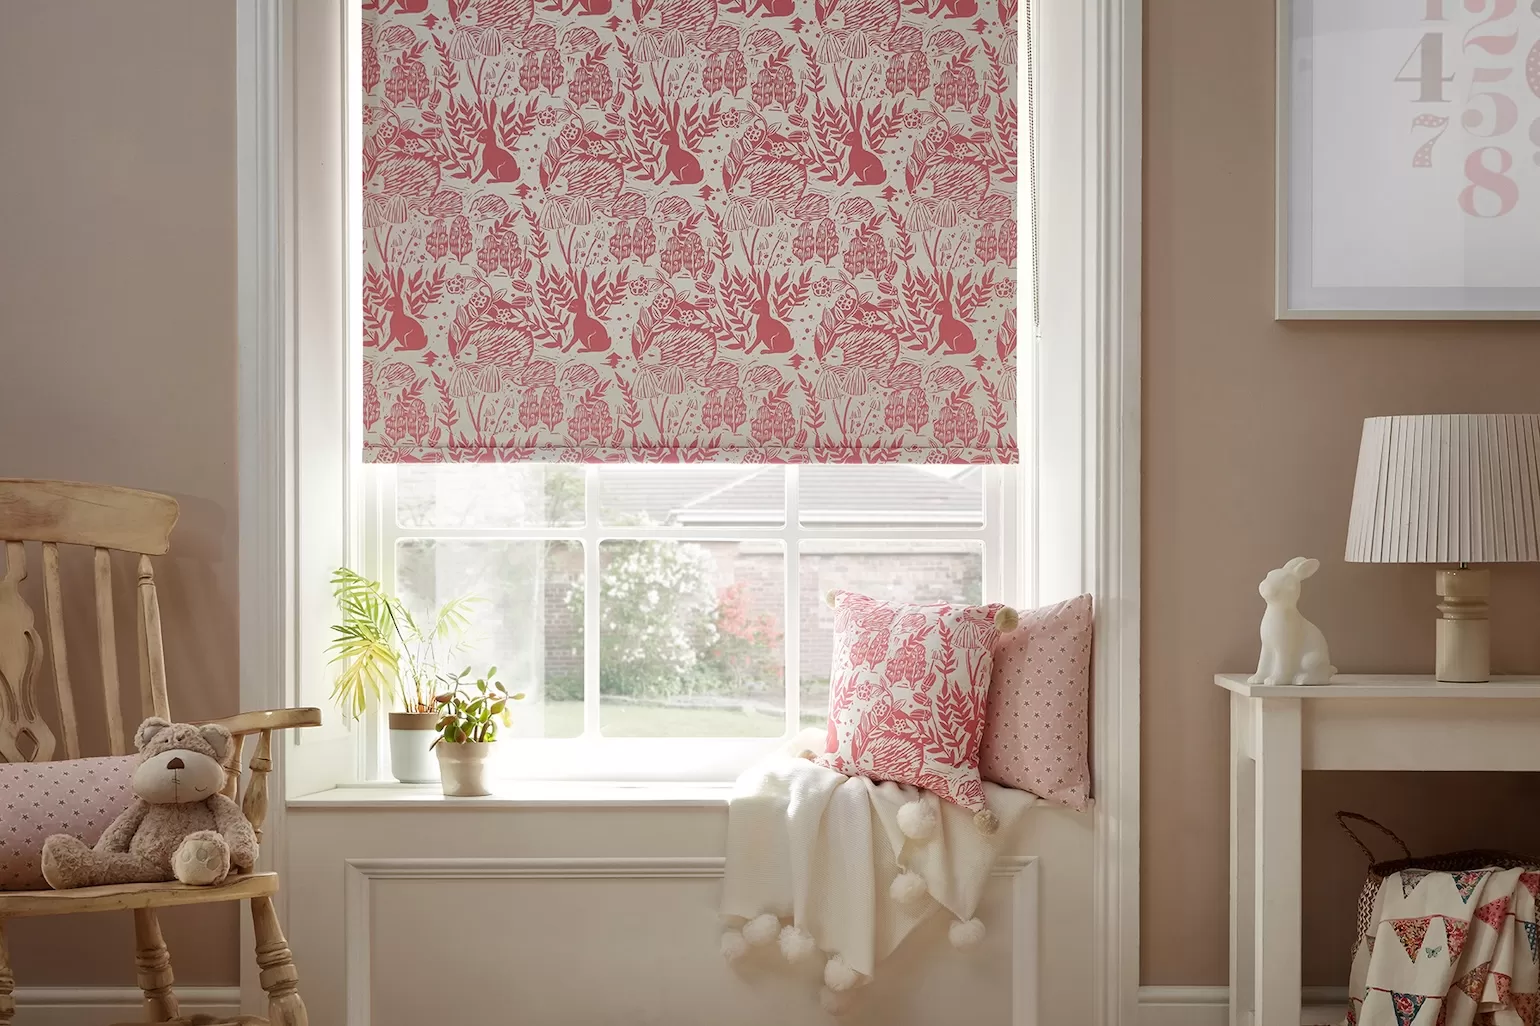 All made to measure blinds are fitted with a metal nickel chain complete with child safety P-clip and double chain break as standard.

A full fabric wrap around bottom bar is only available on Lunette, Glint, Printed Standard Daylight and Printed Textured qualities.
